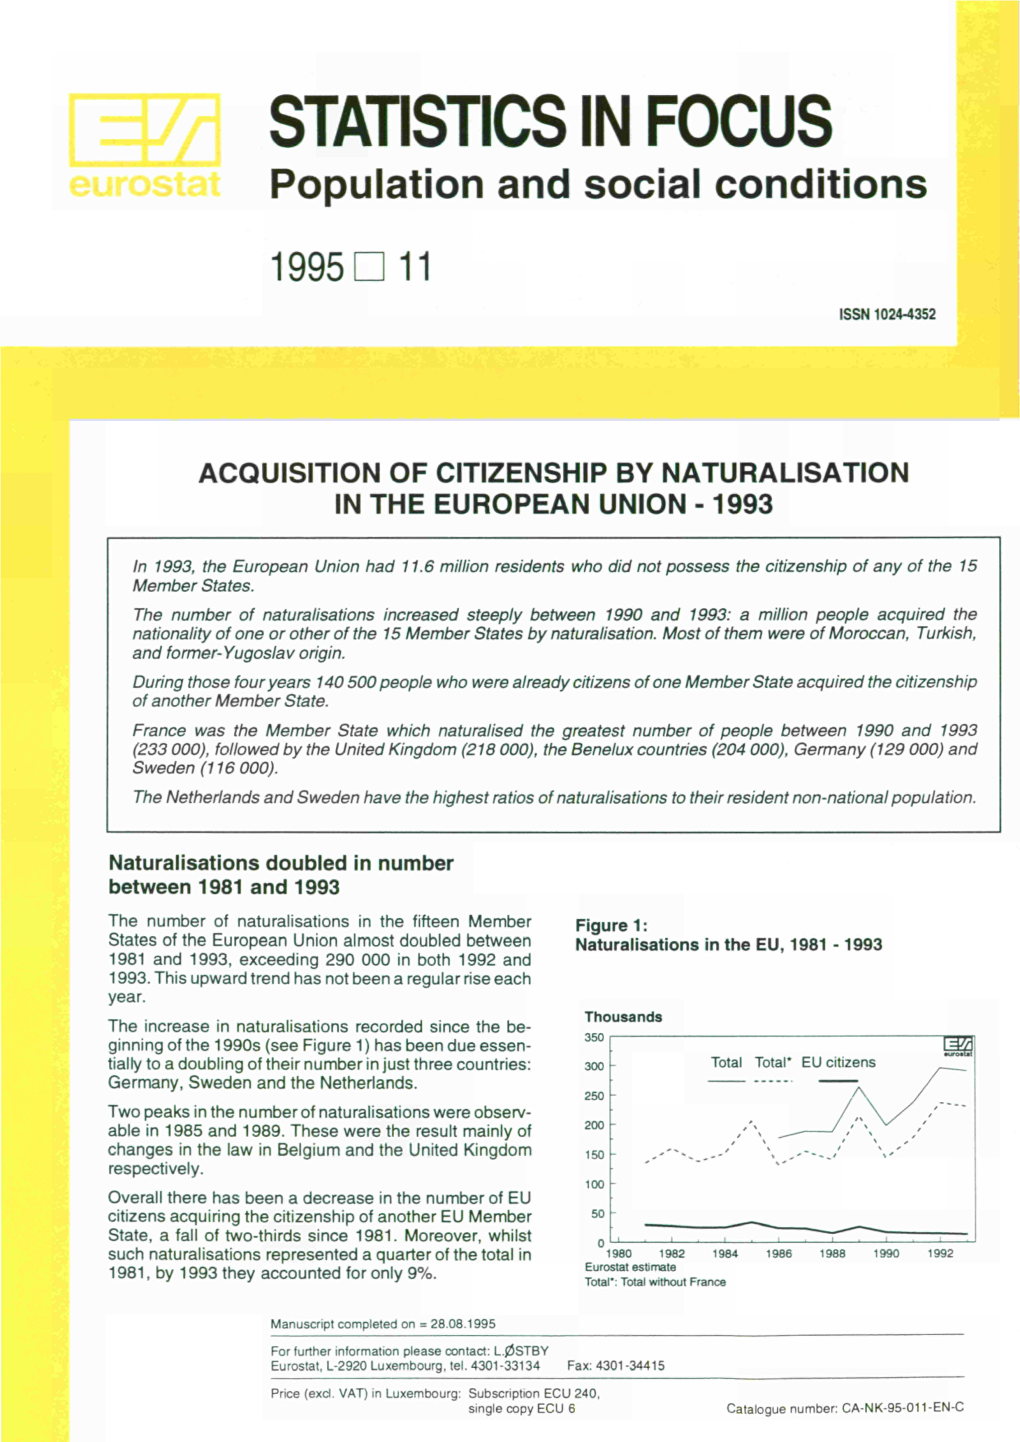 Acquisition of Citizenship by Naturalisation in the European Union -1993